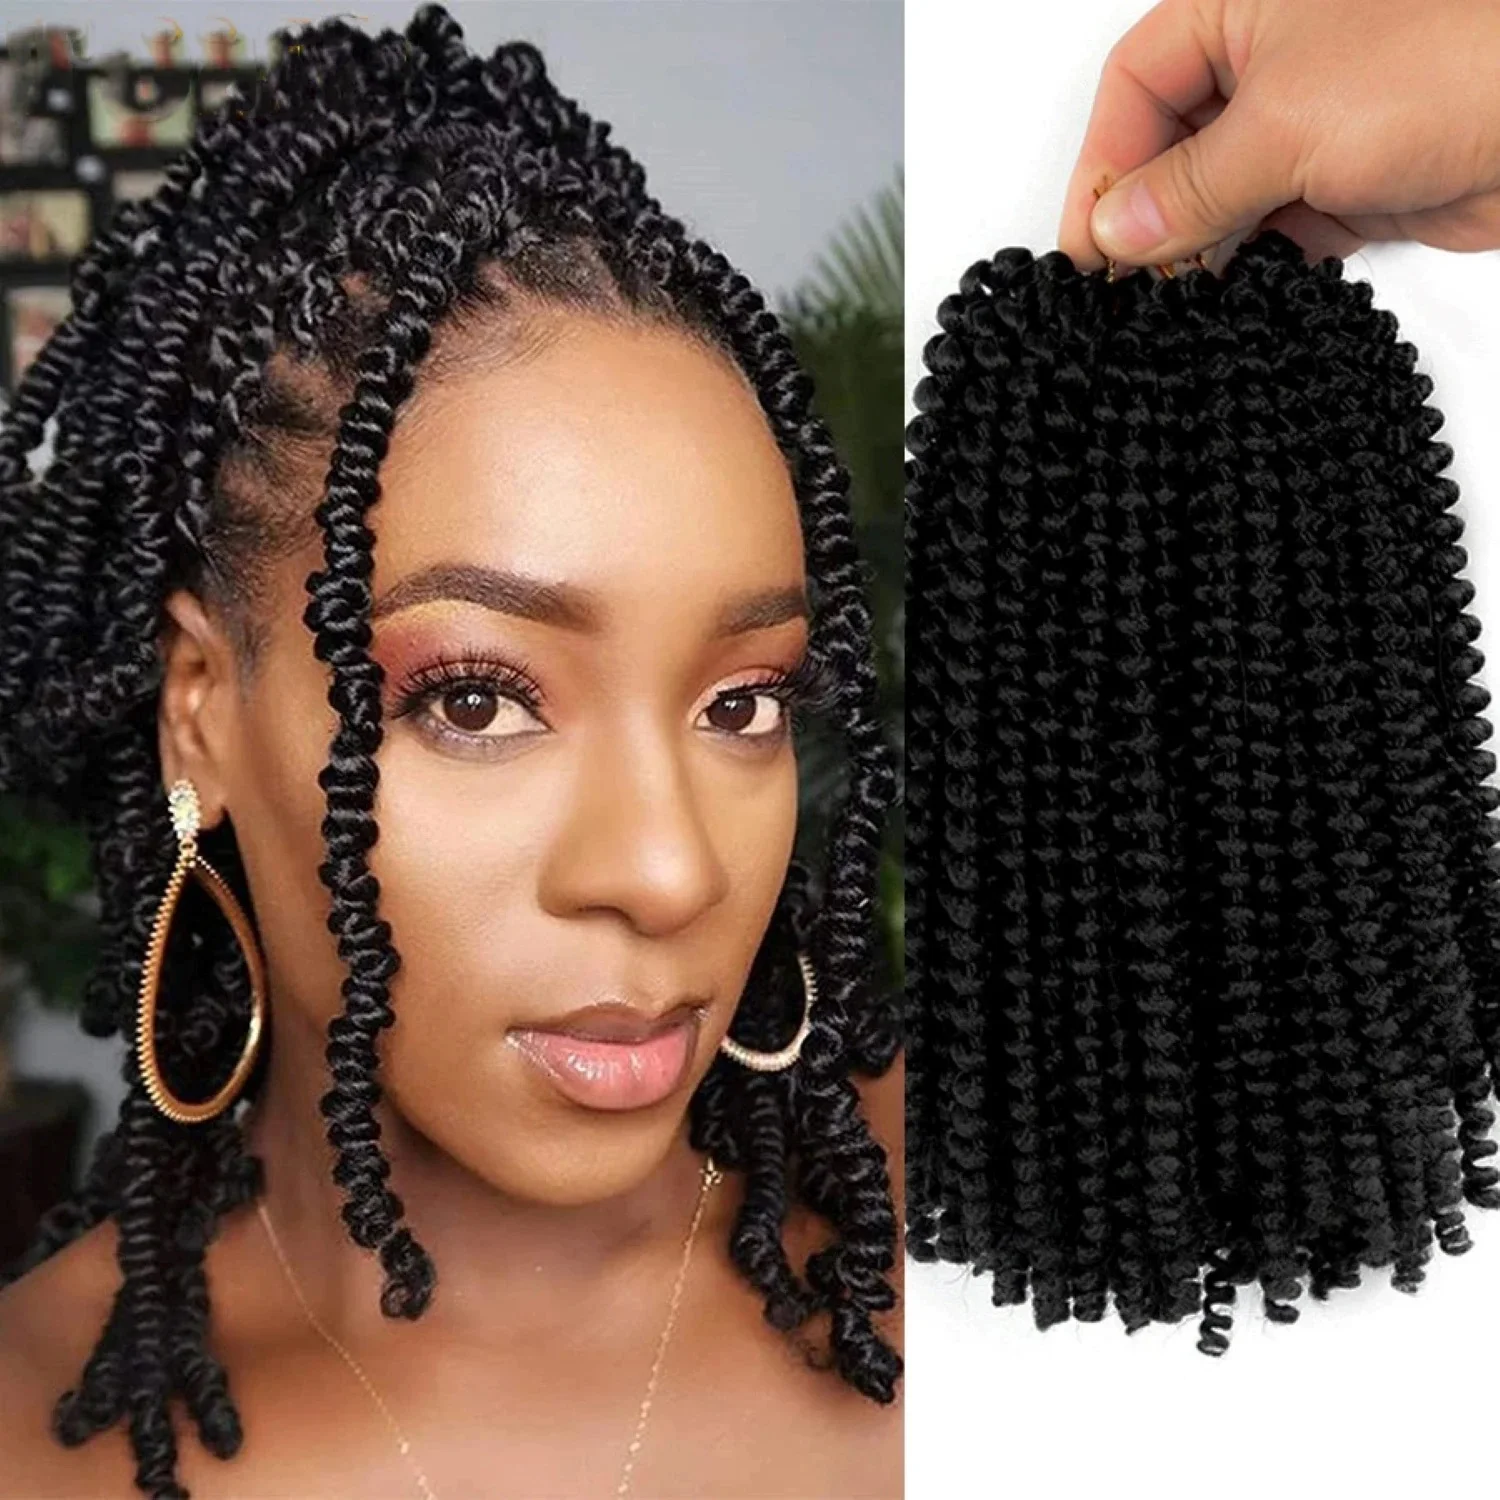 Ombre Spring Twist Hair Synthetic Crochet Braids Passion Twist 8Inch Pre-Twist Crochet Hair Extensions 30Roots Bomb Twist